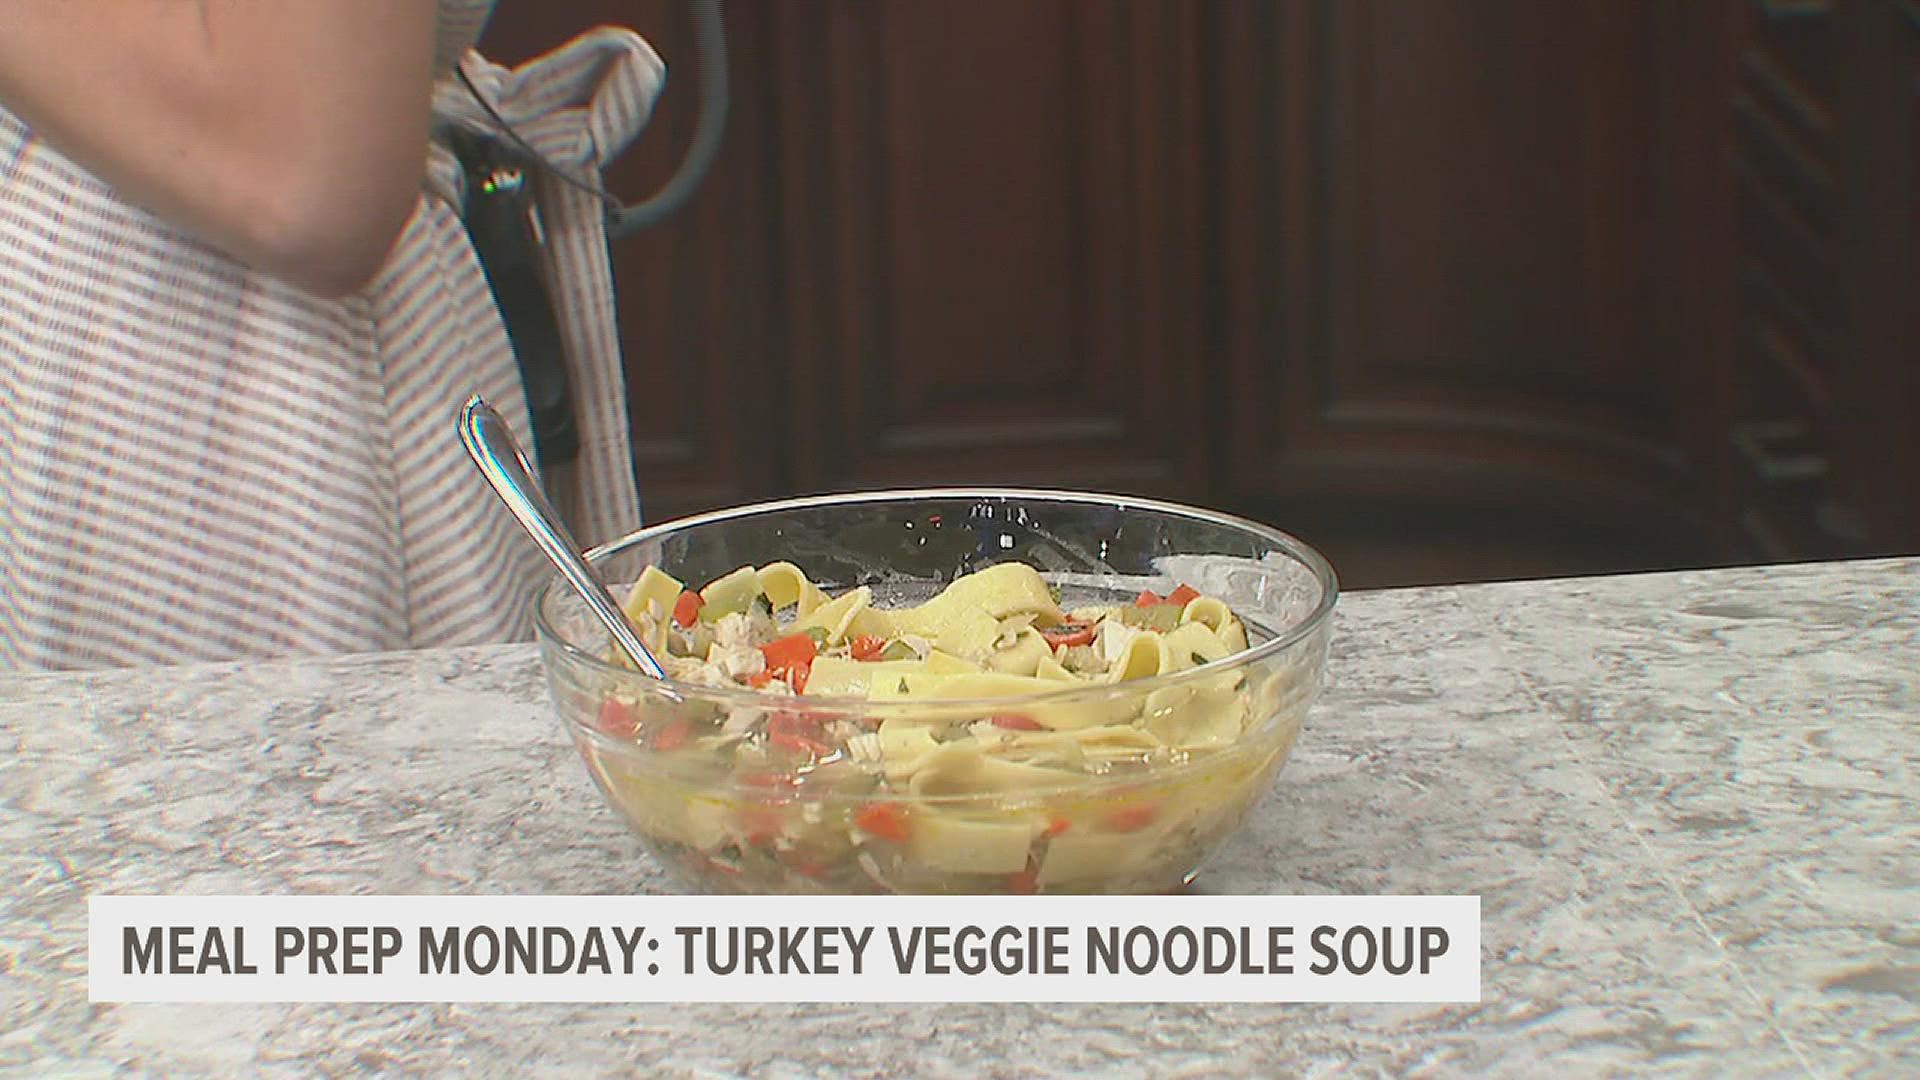 It's cold out, which means soup season is going to be here for a while! Here's an easy turkey vegetable soup recipe to get you started for the week.